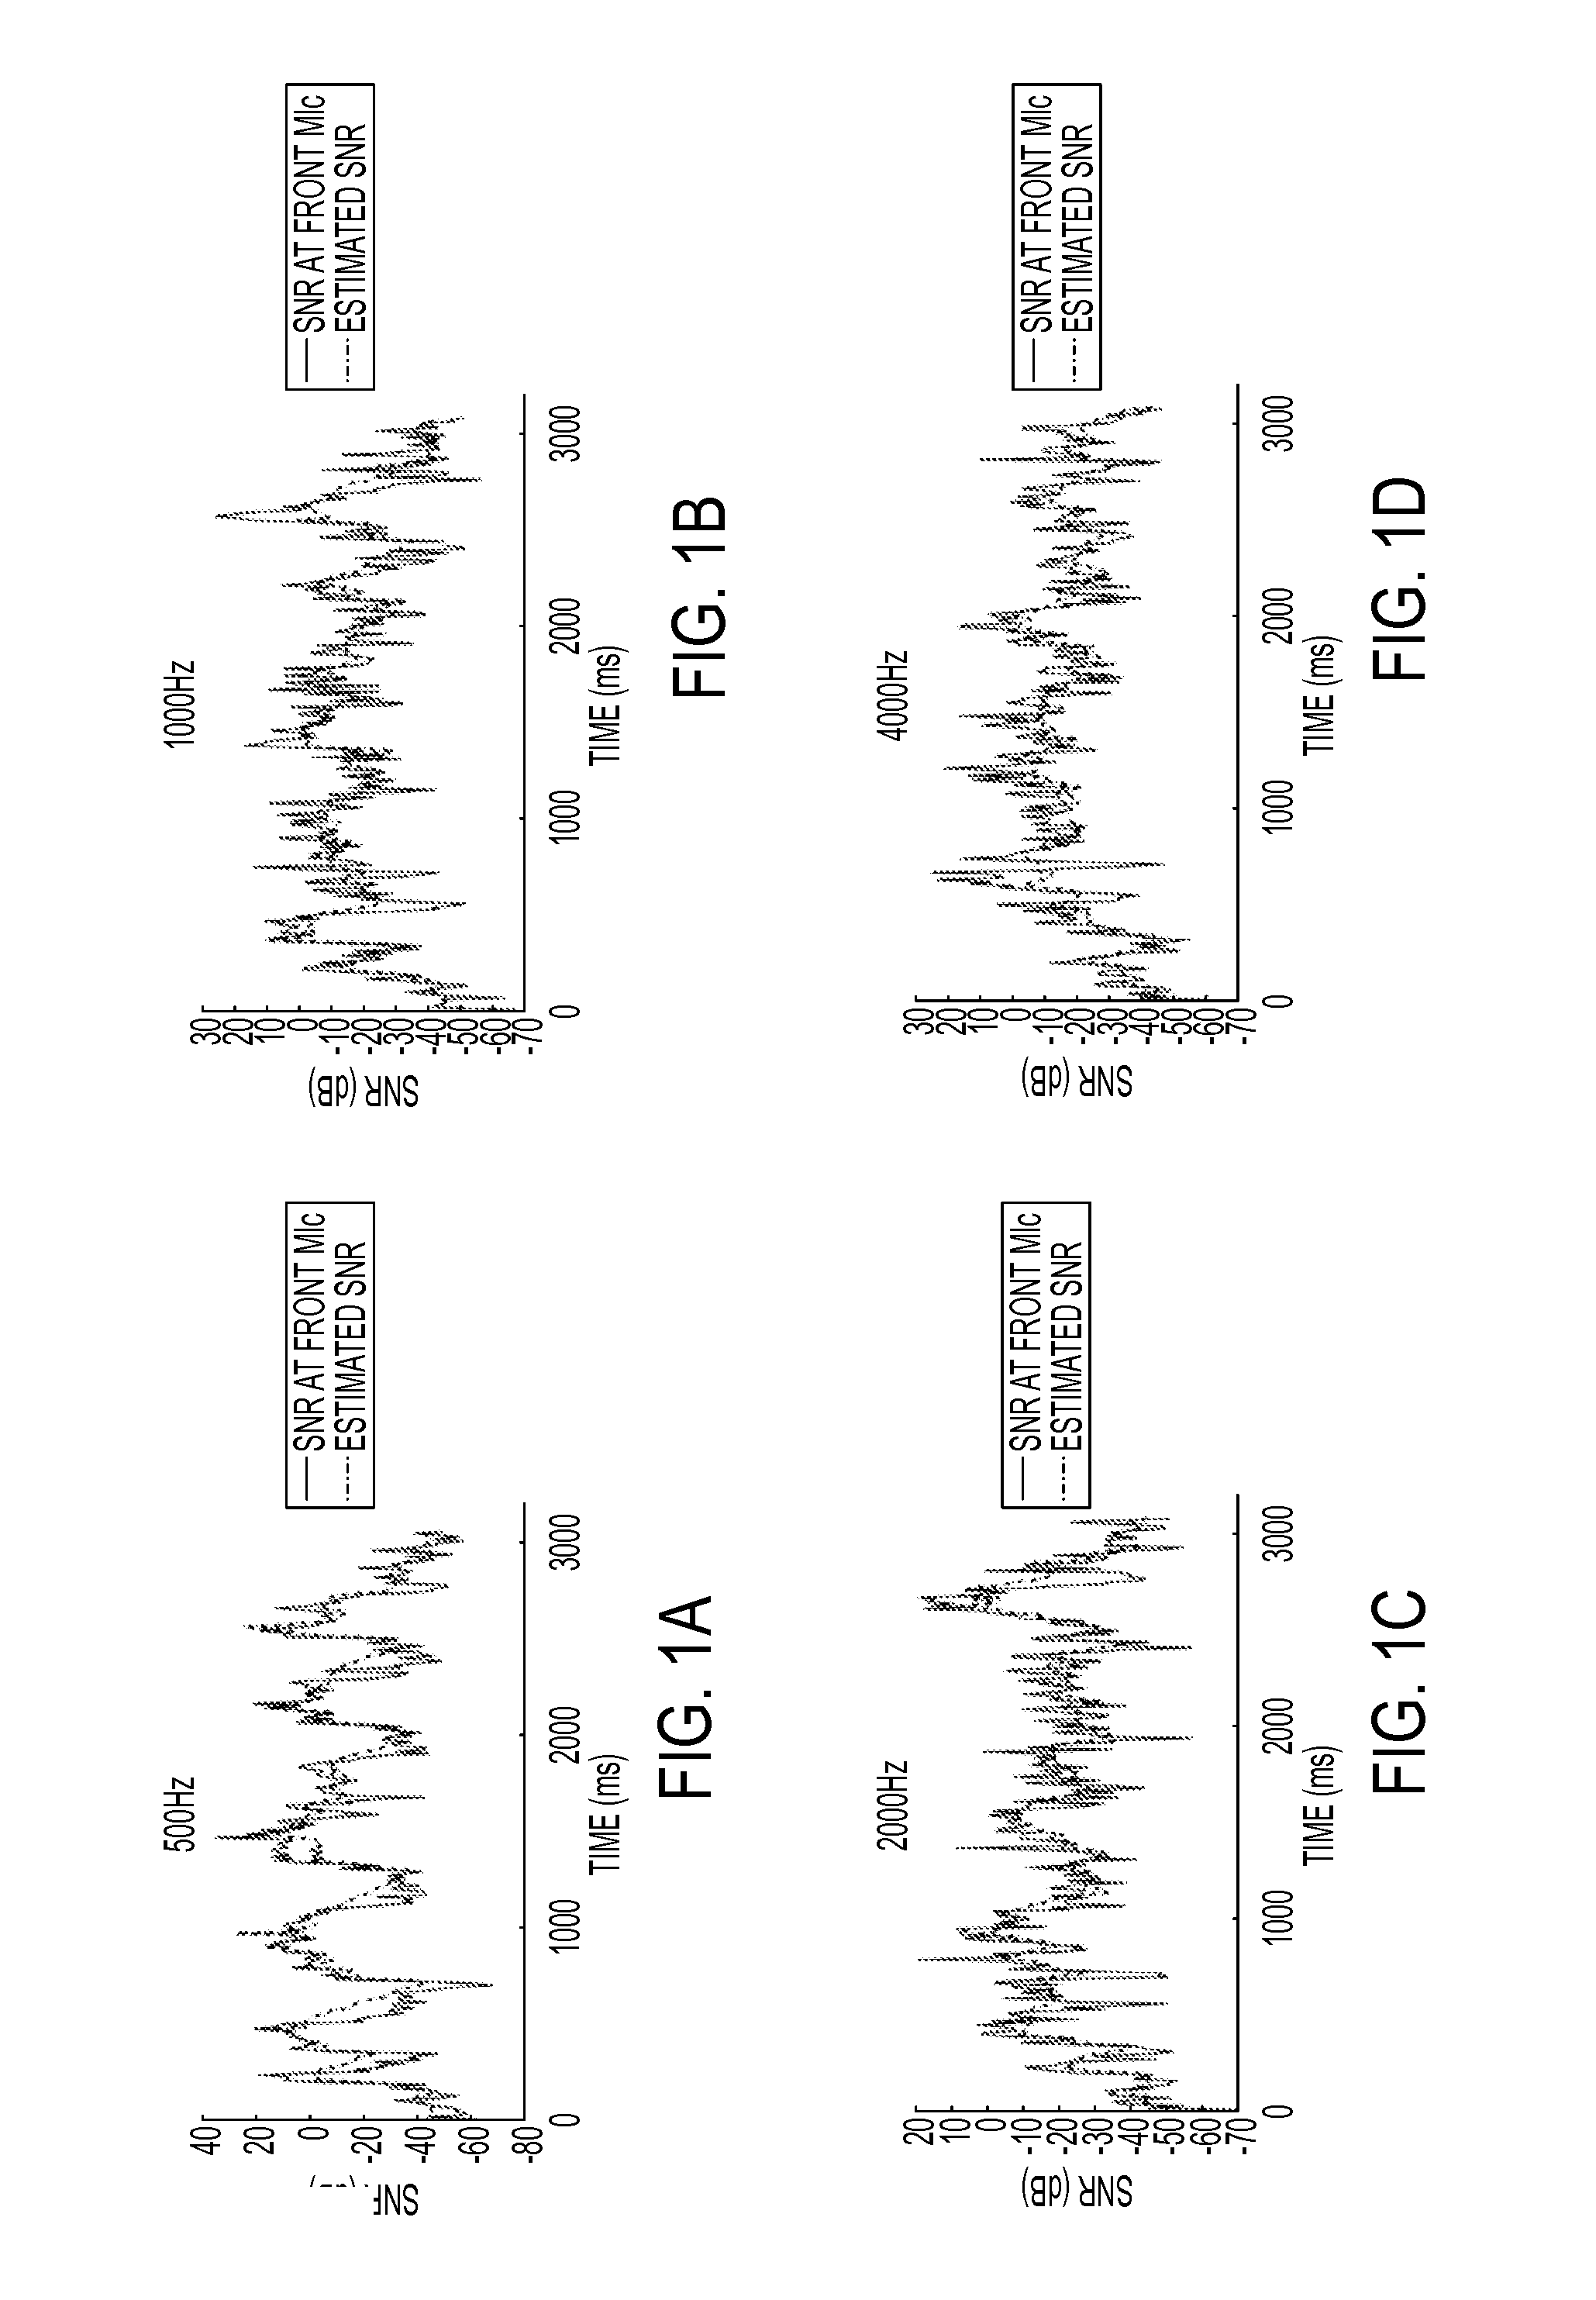 Method and system for enhancing the intelligibility of sounds relative to background noise